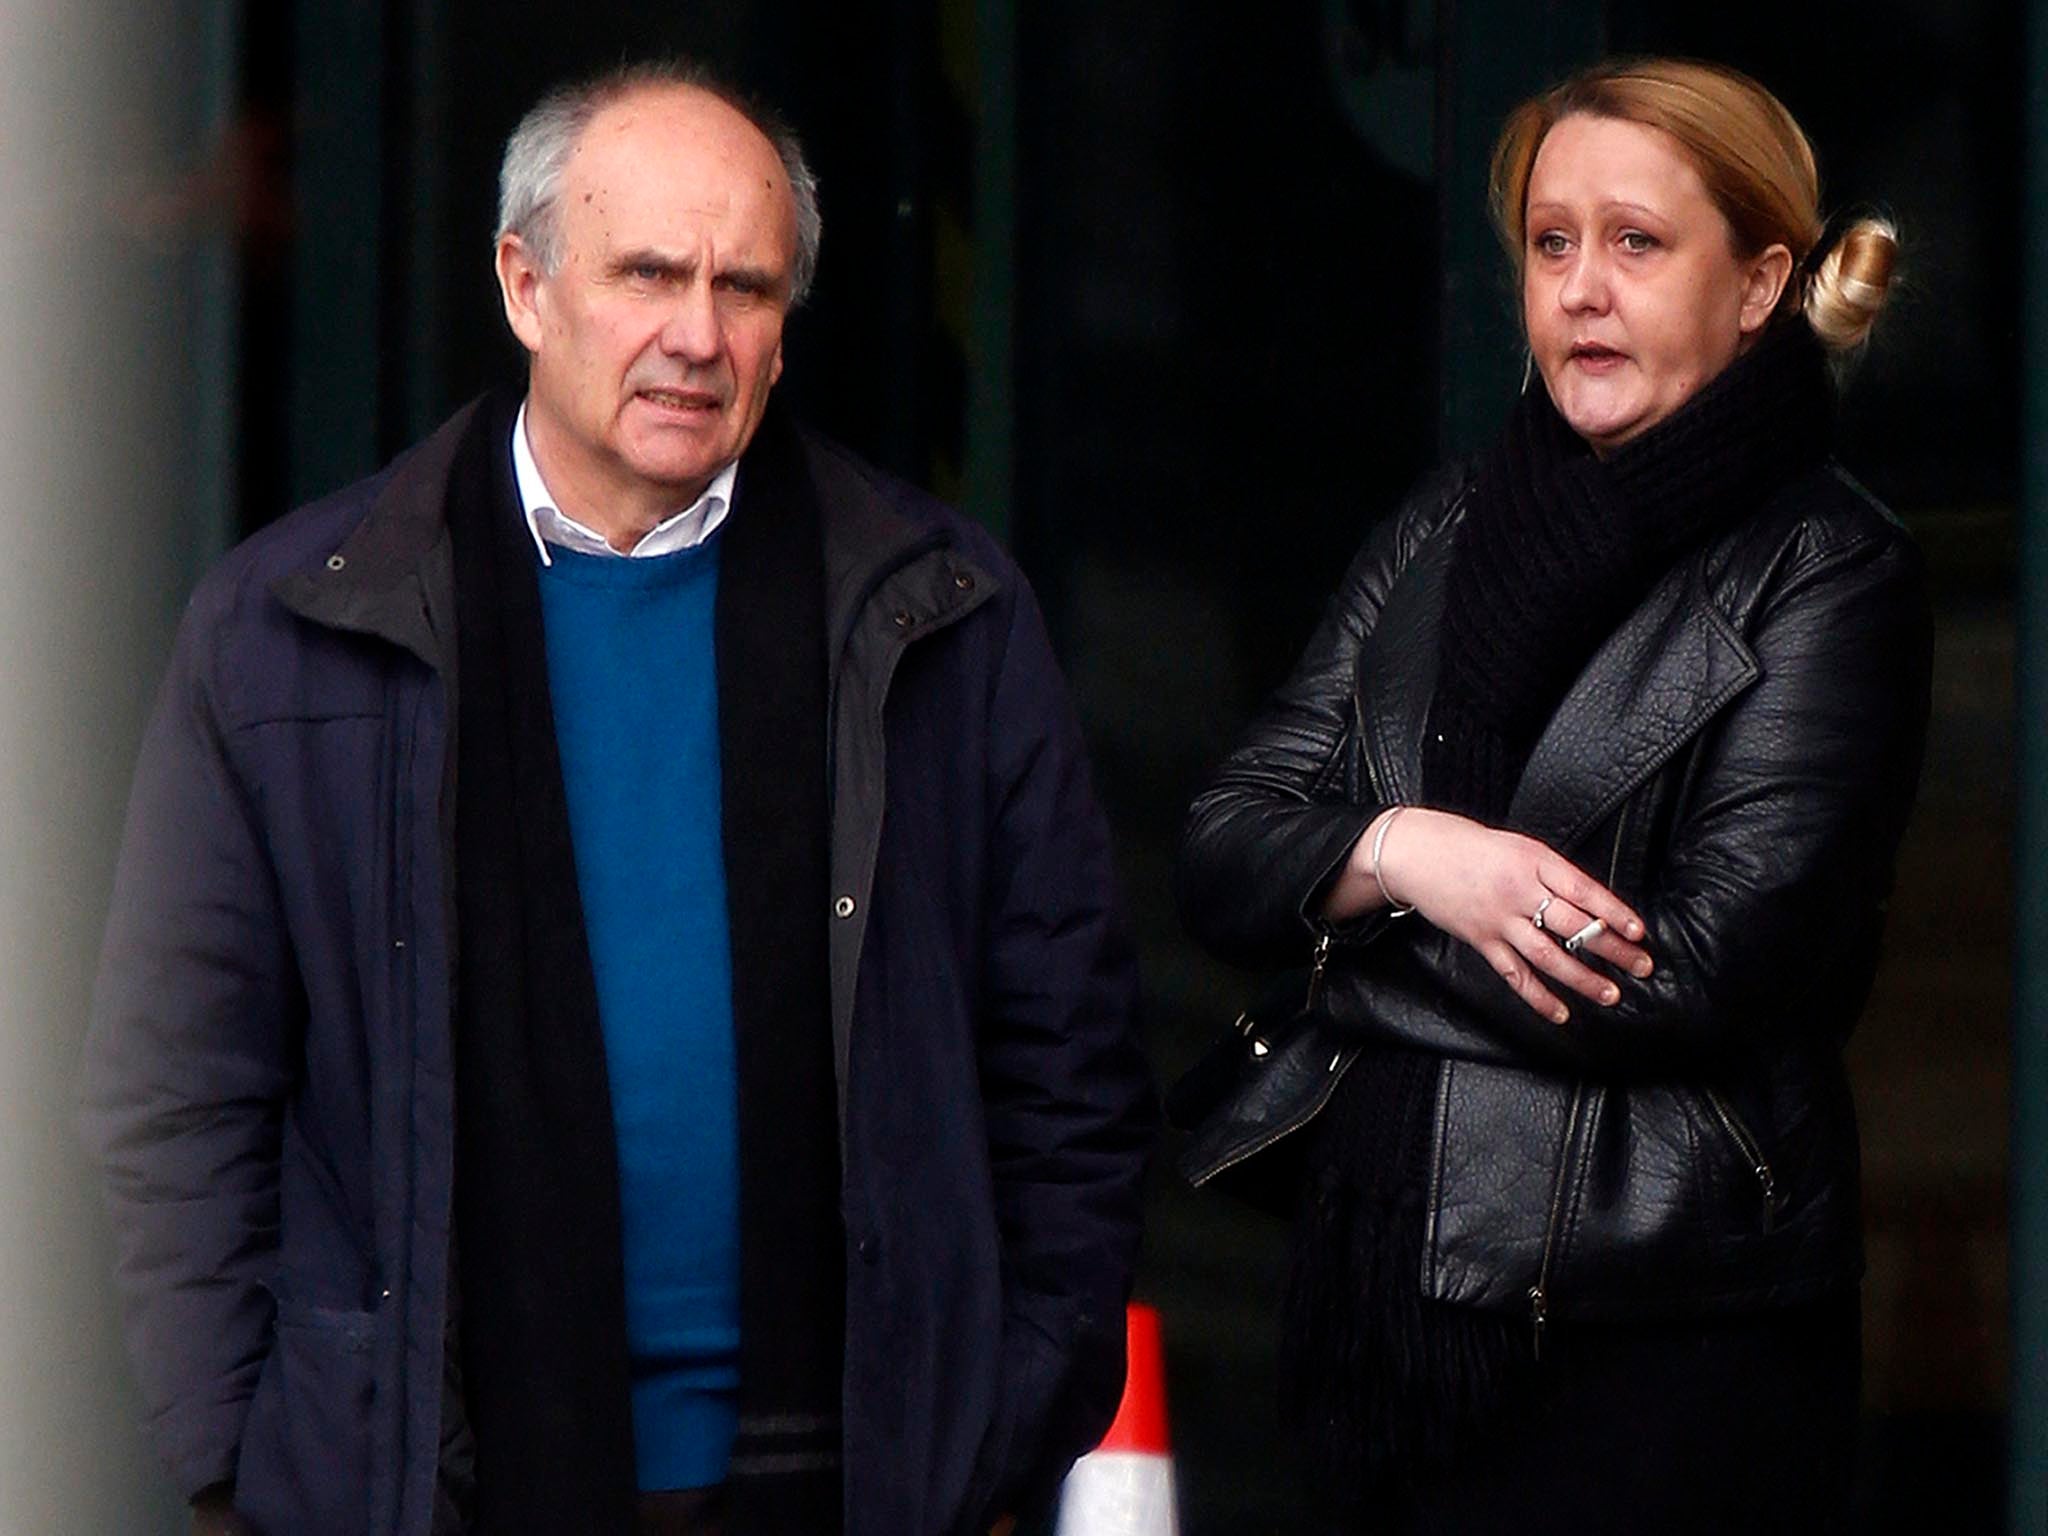 Caroline Lea outside Preston Crown Court where she denies seven counts of engaging in sexual activity with a child on various dates between December 2013 and March 2014.